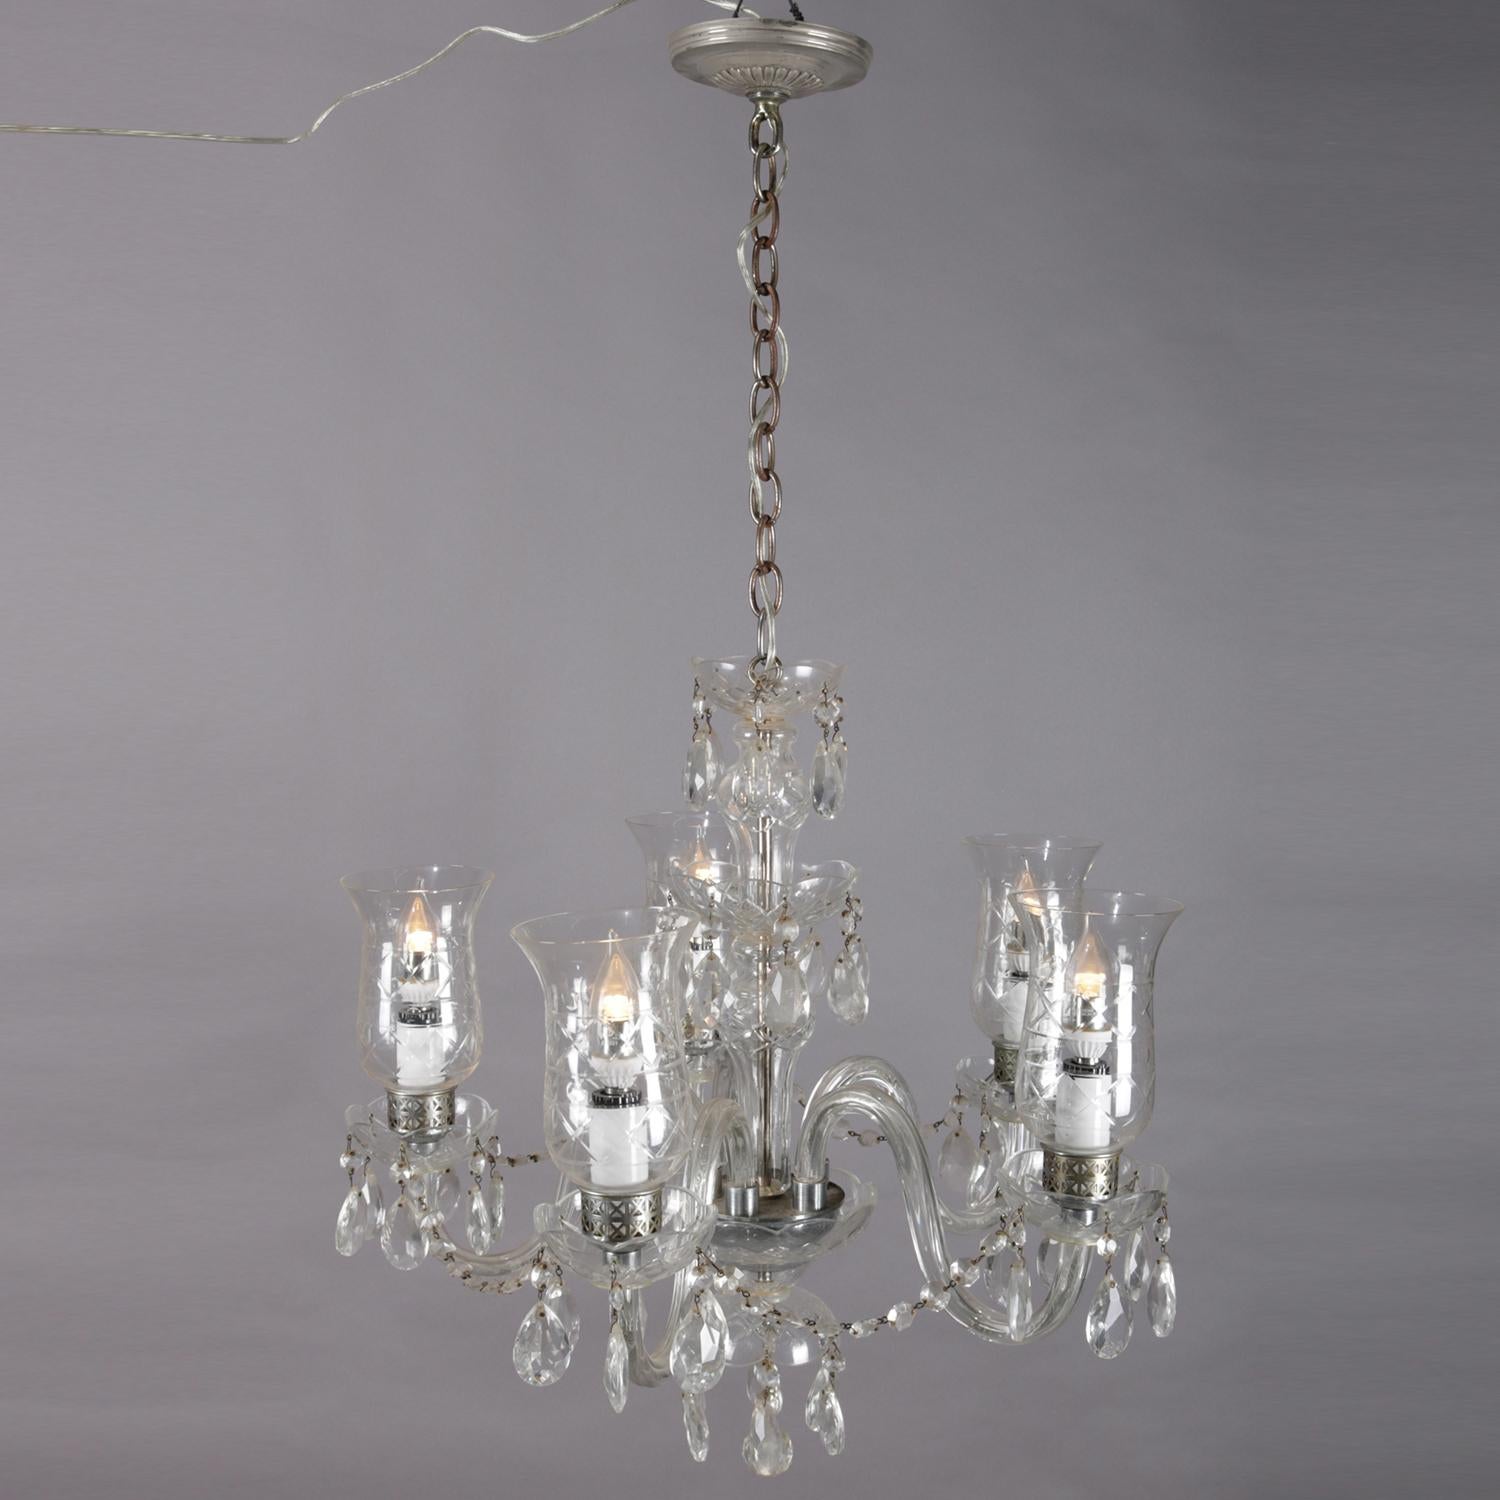 Etched Vintage French Crystal and Chrome 5-Light Chandelier with Cut Glass Shades